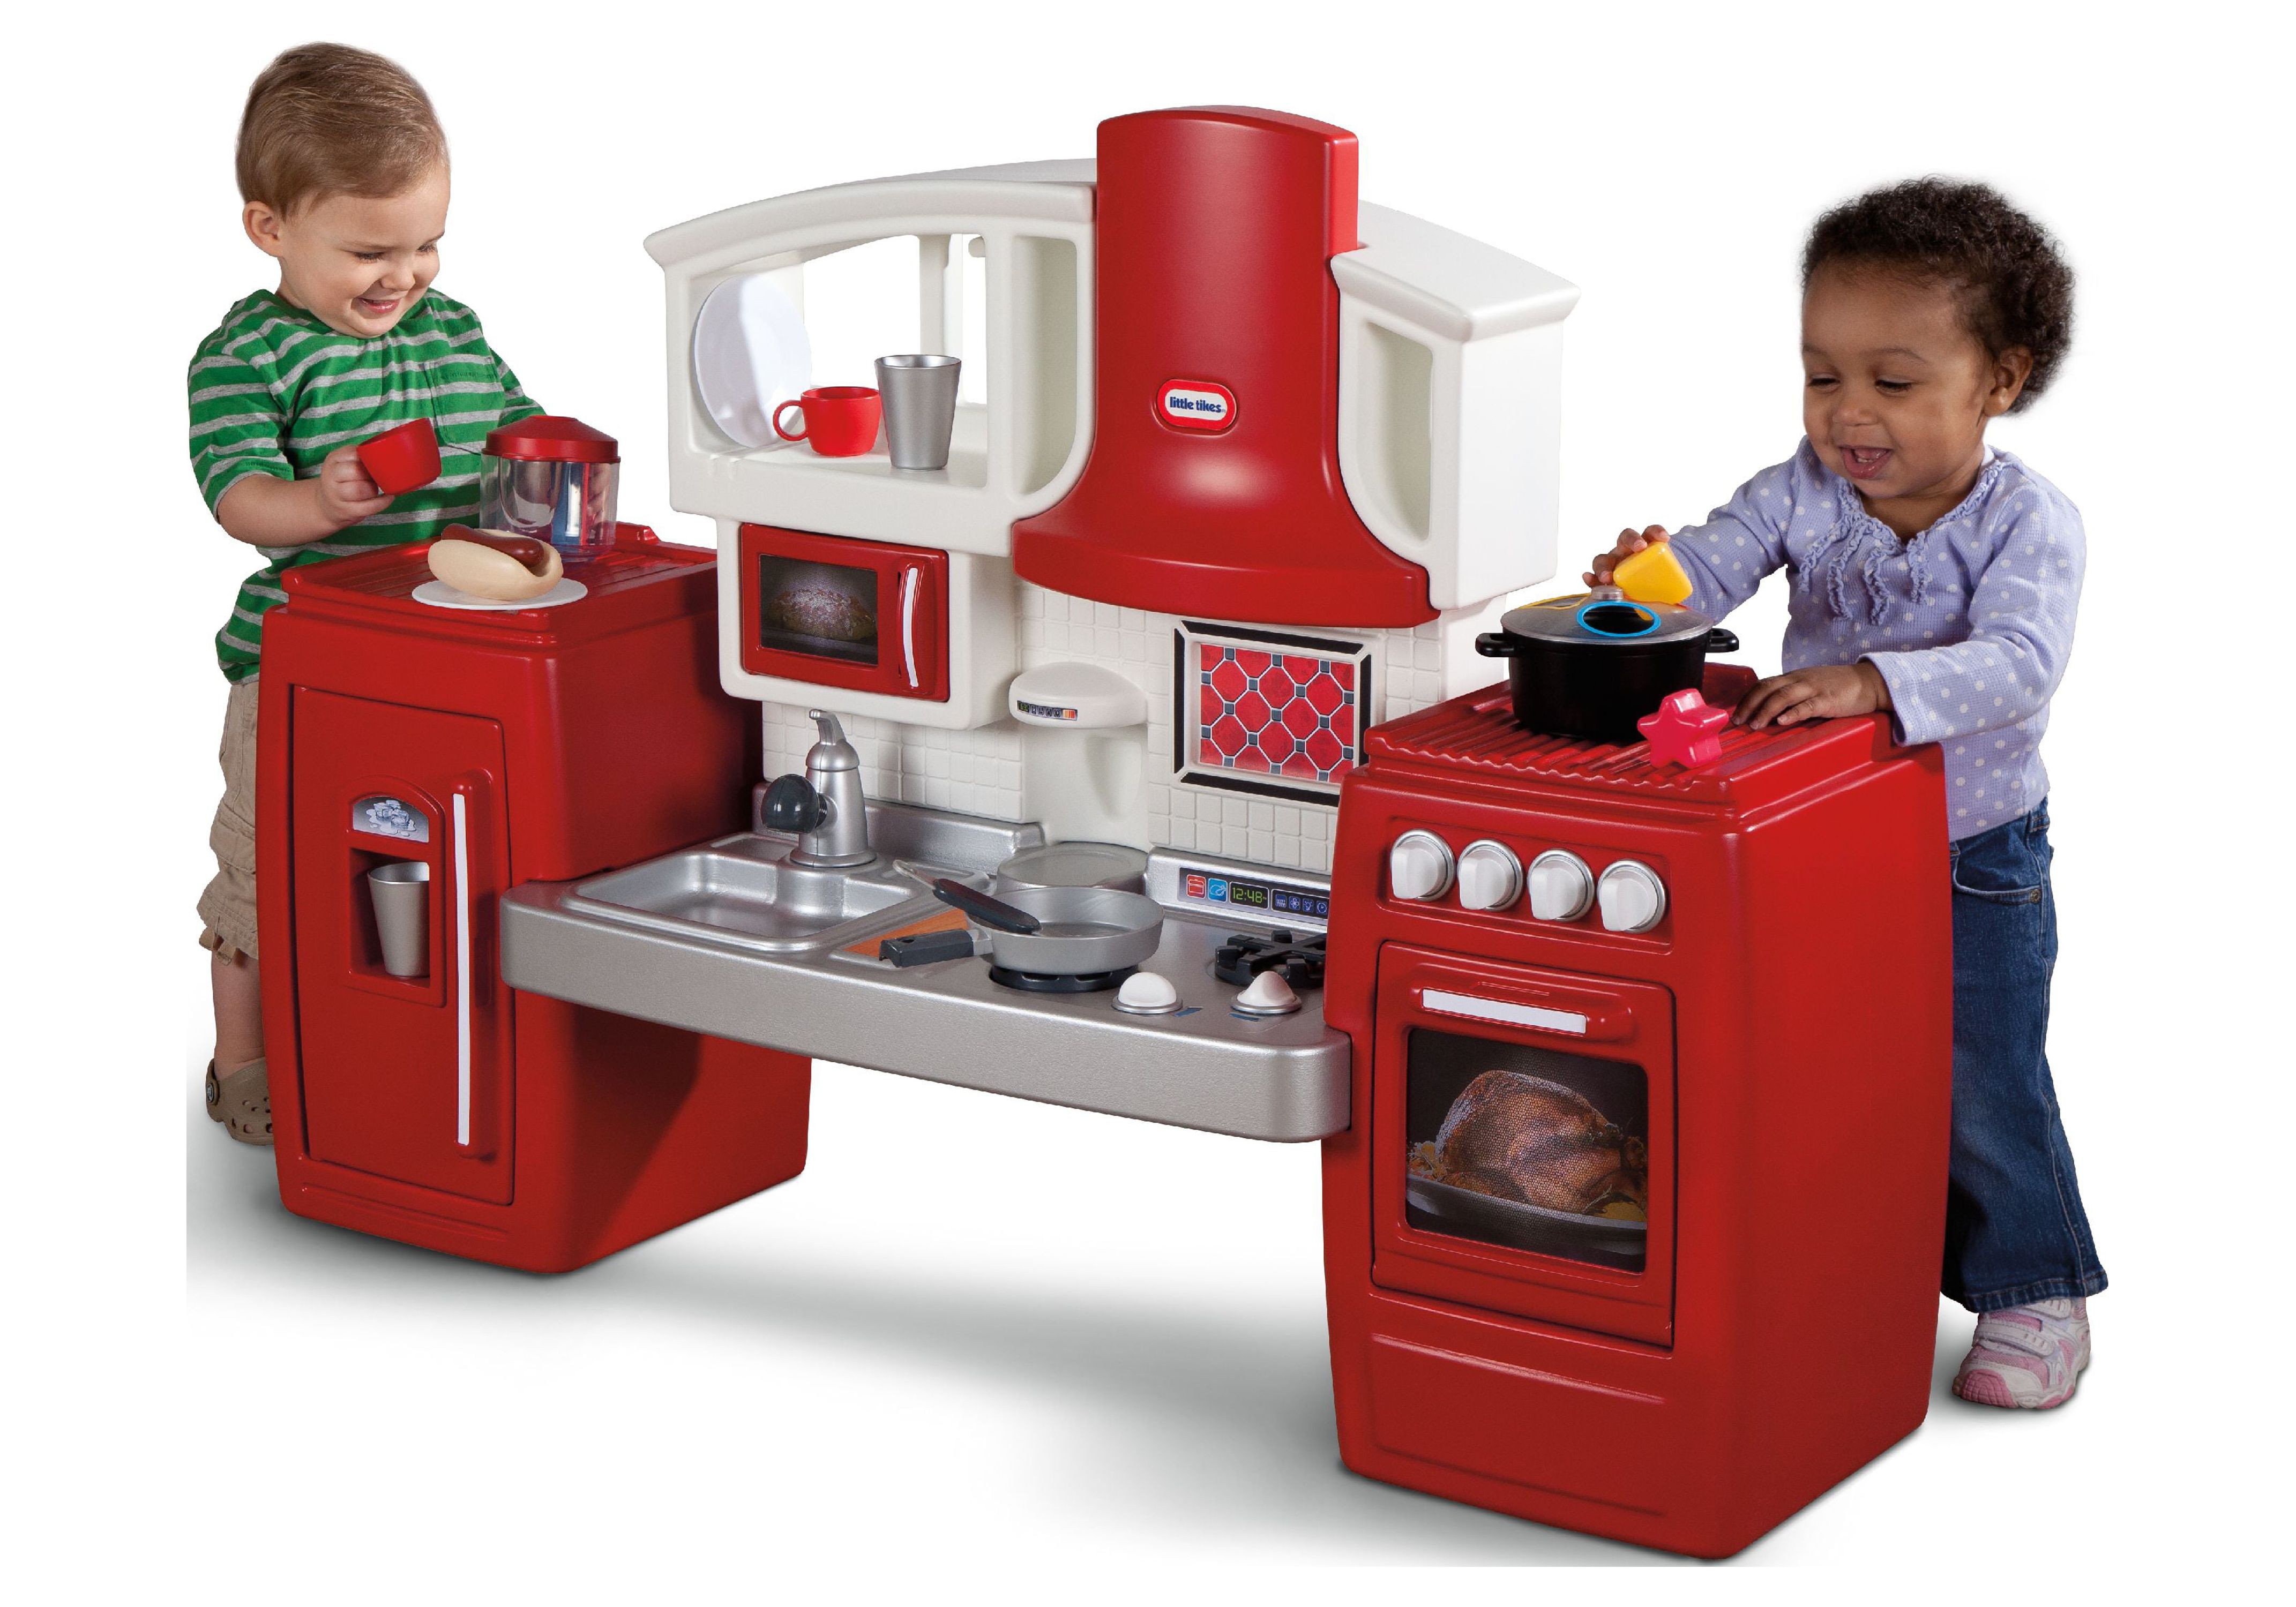 Little Tikes Cook 'n Grow Pretend Play Kids Toy Cooking Kitchen Play Set, Red - image 3 of 7